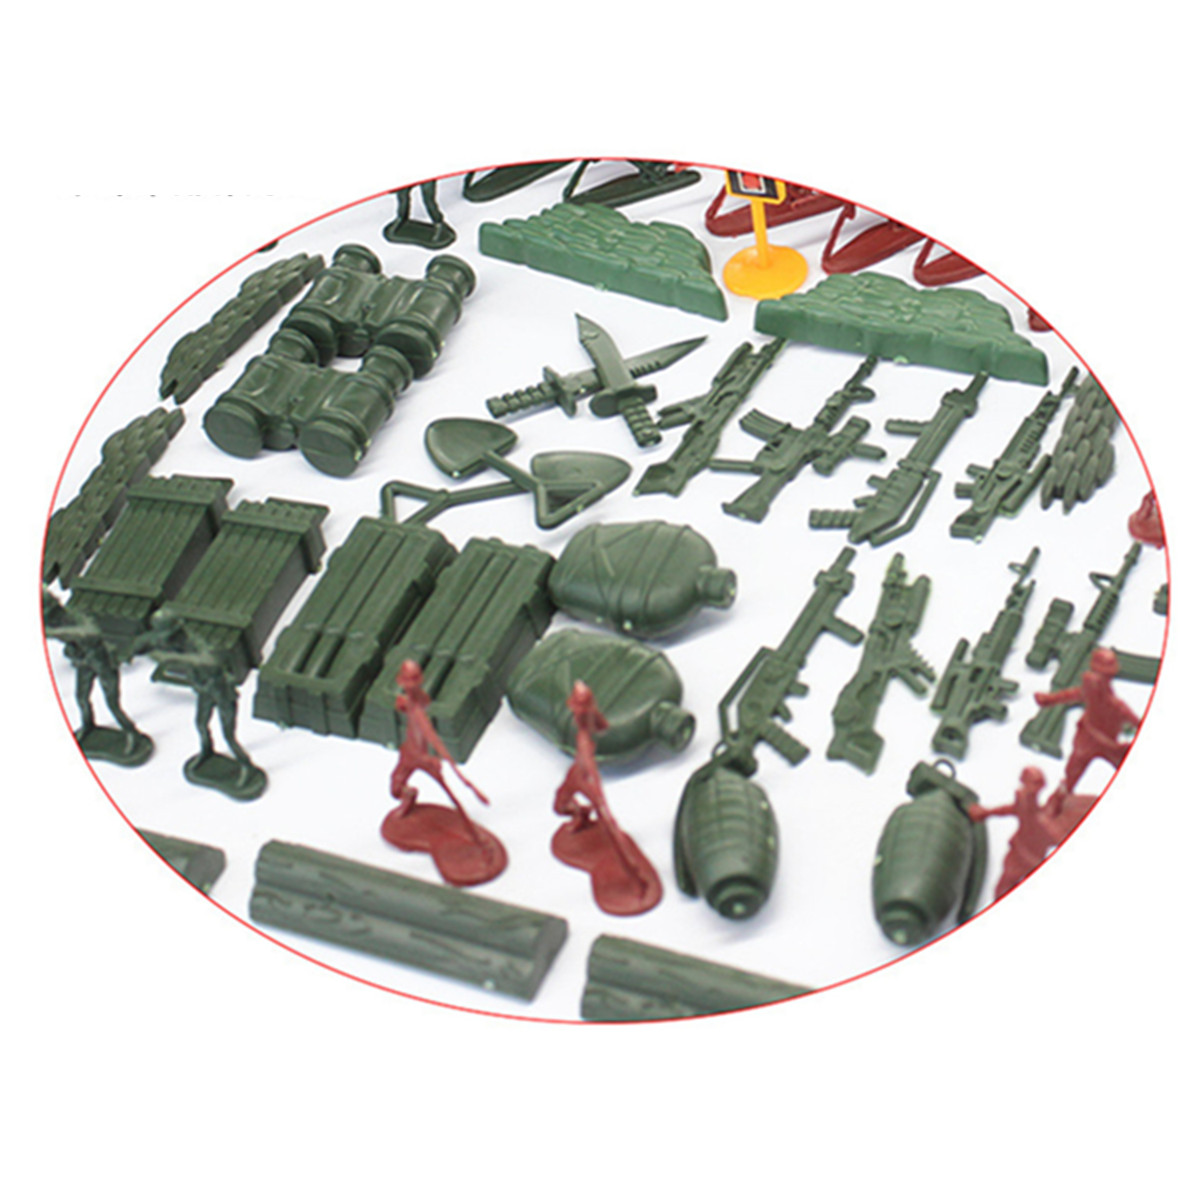 330pcs Military Plastic Model Playset Toy Soldiers Figures & Accessories Kid Toys